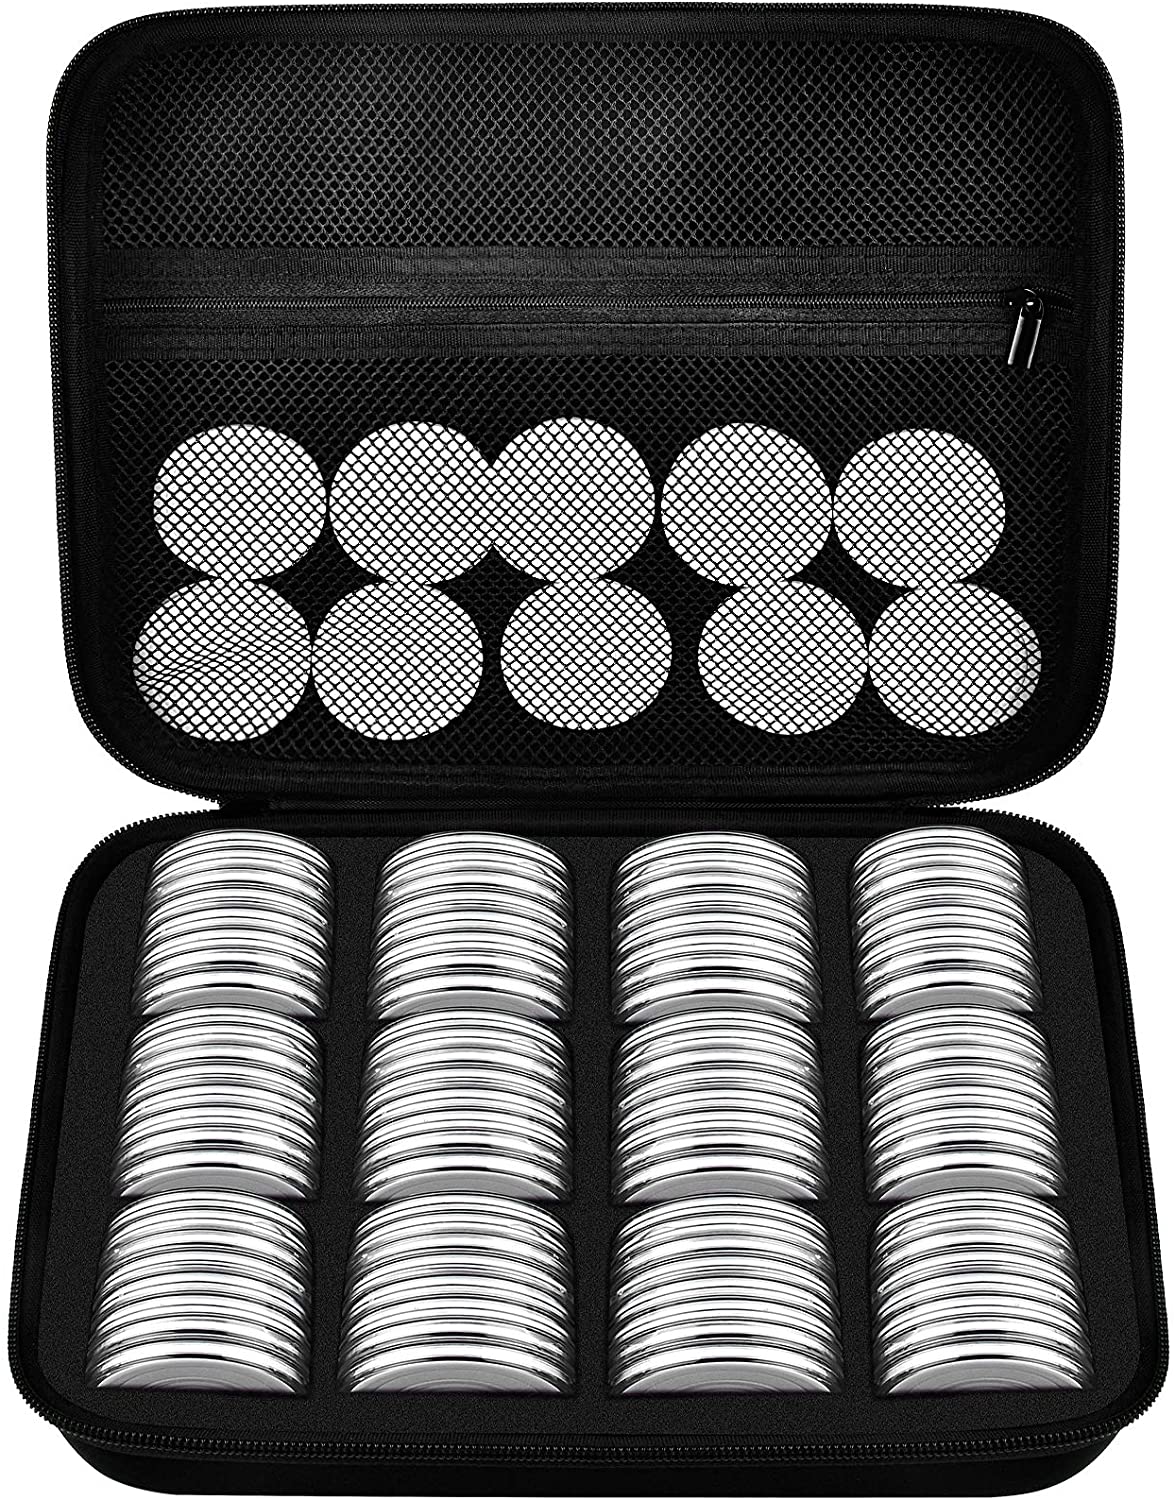 FULLCASE Coin Collection Supplies Holders for Collectors, 84 Pieces 46mm  Coins Capsules with Foam Gasket and Plastic Storage Organizer Box, 6 Sizes